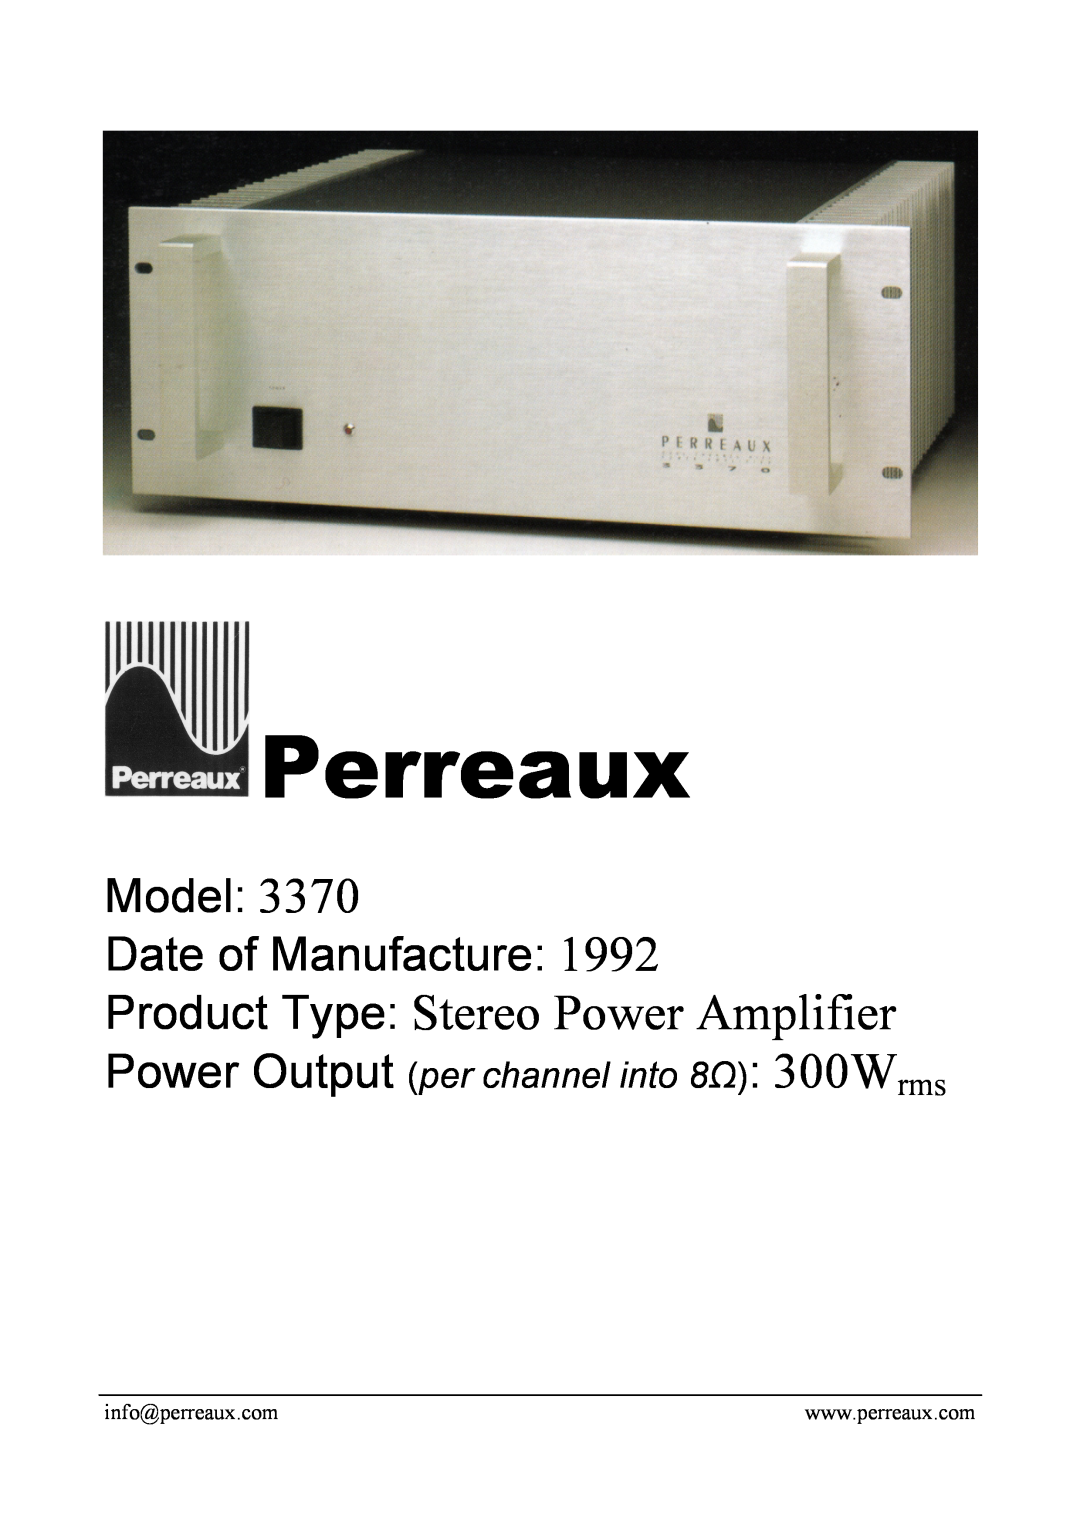 Perreaux 3370 manual Perreaux, Product Type Stereo Power Amplifier, Model Date of Manufacture 